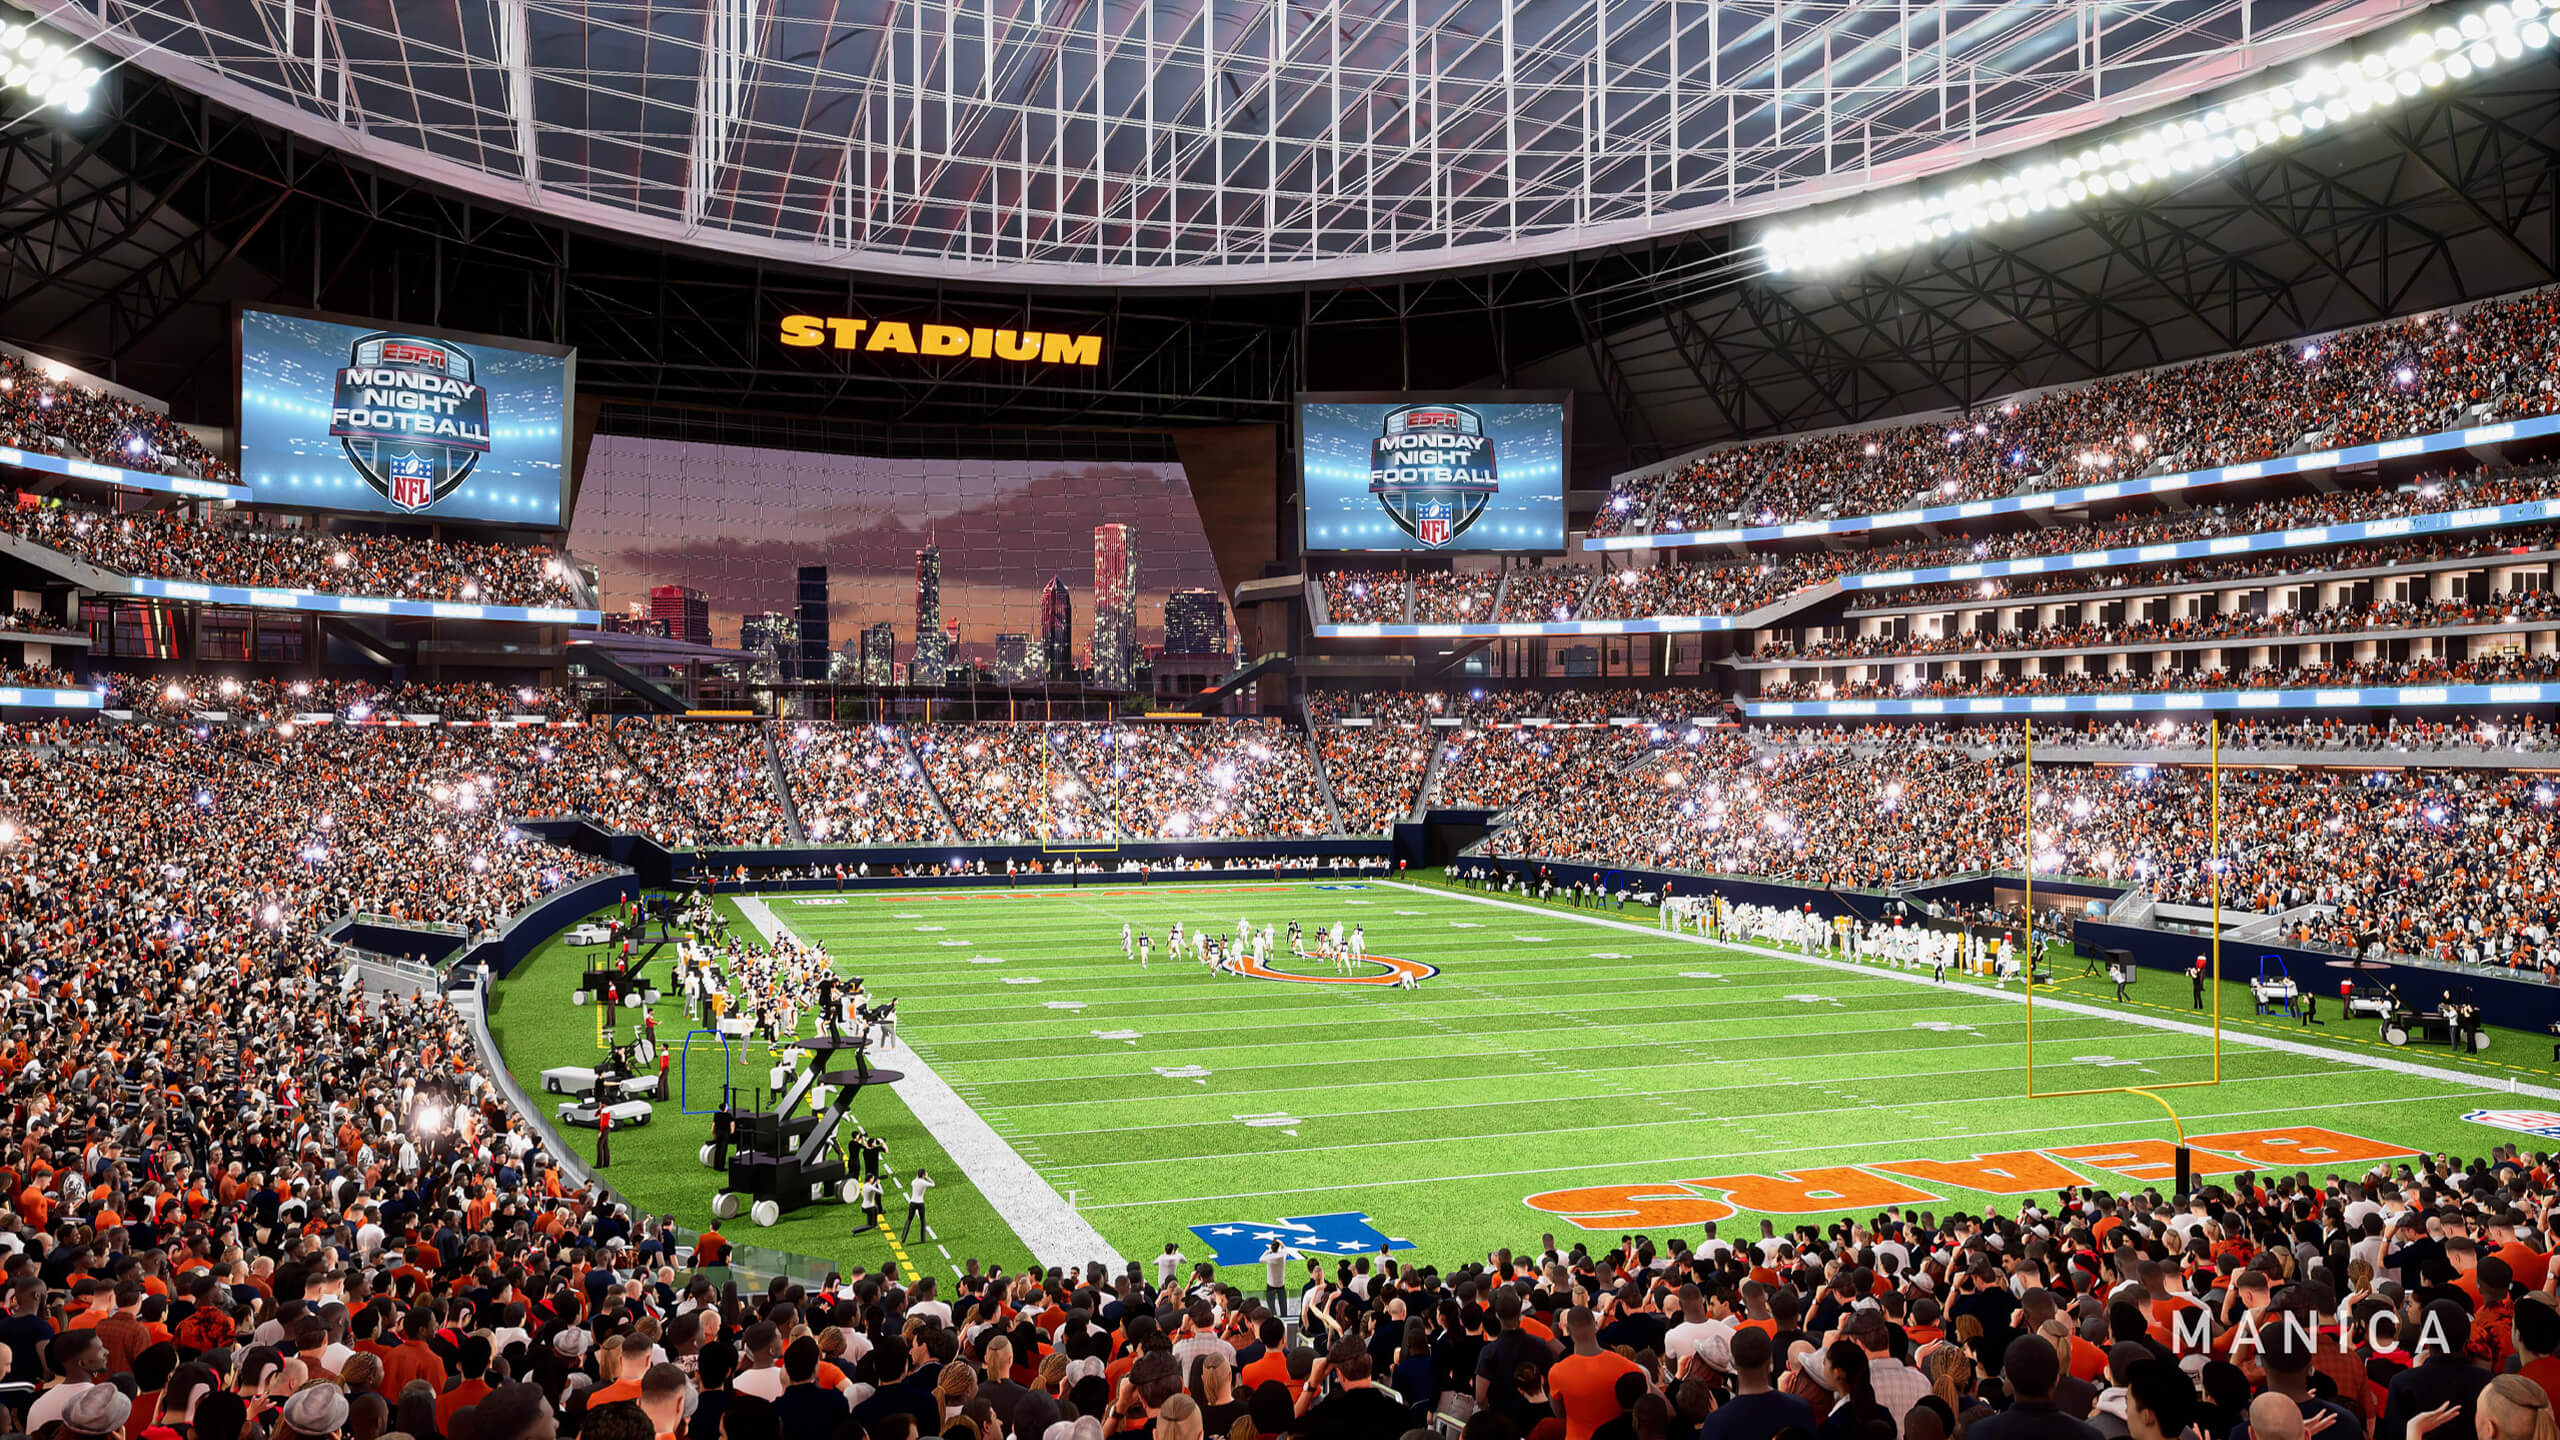 Renderings of a new lakefront stadium were released by the Chicago Bears on April 24, 2024. (Manica)